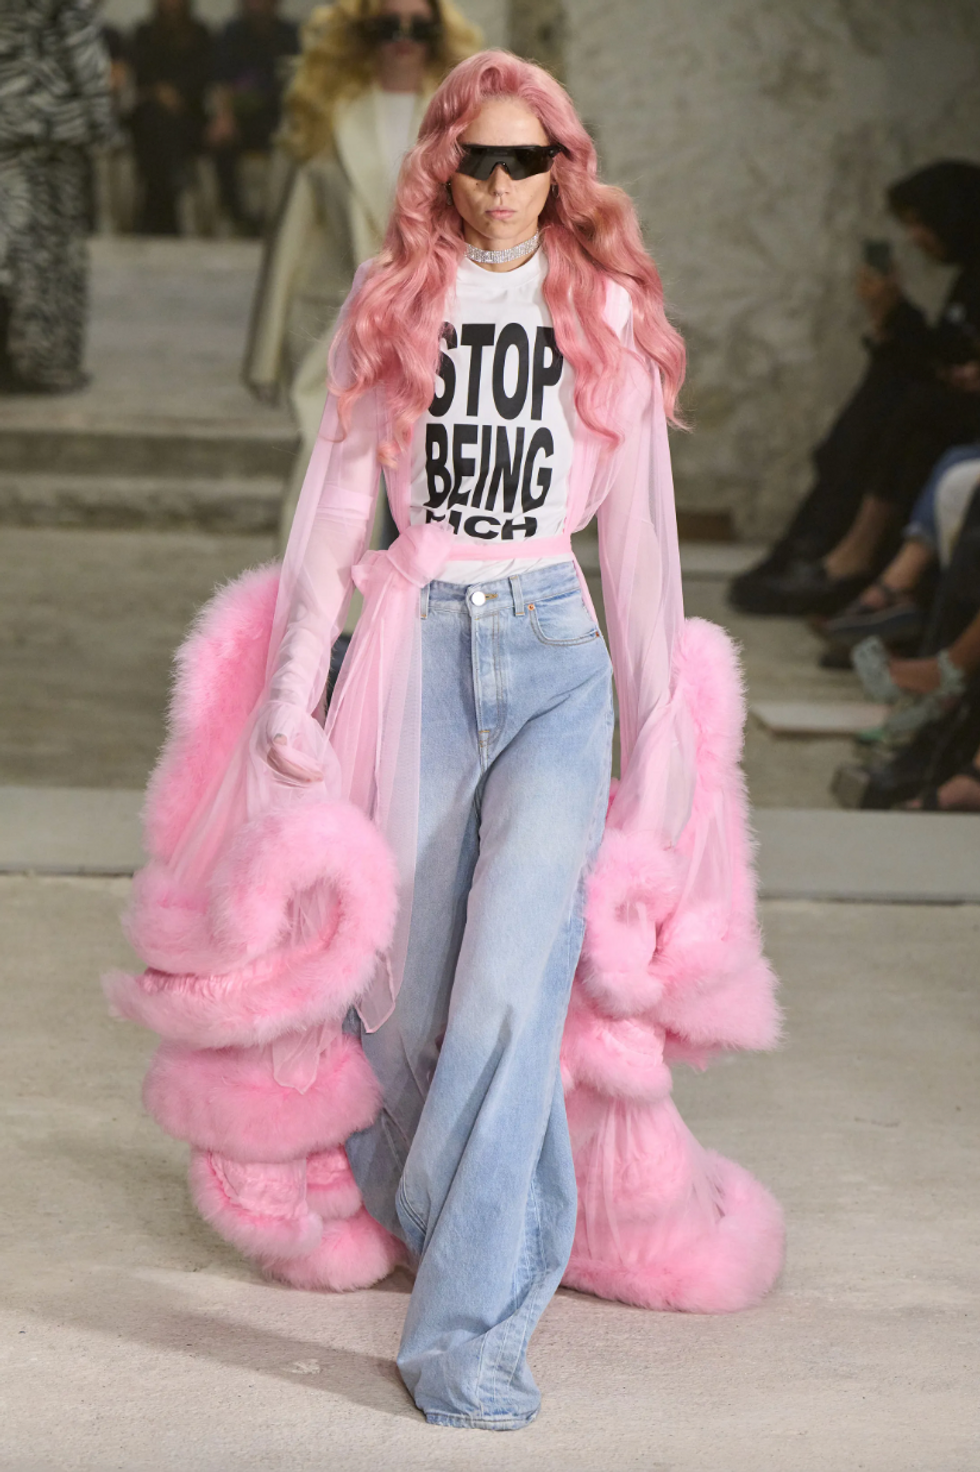 Vetements Brings Its Brand of Disruption to Couture - The New York Times